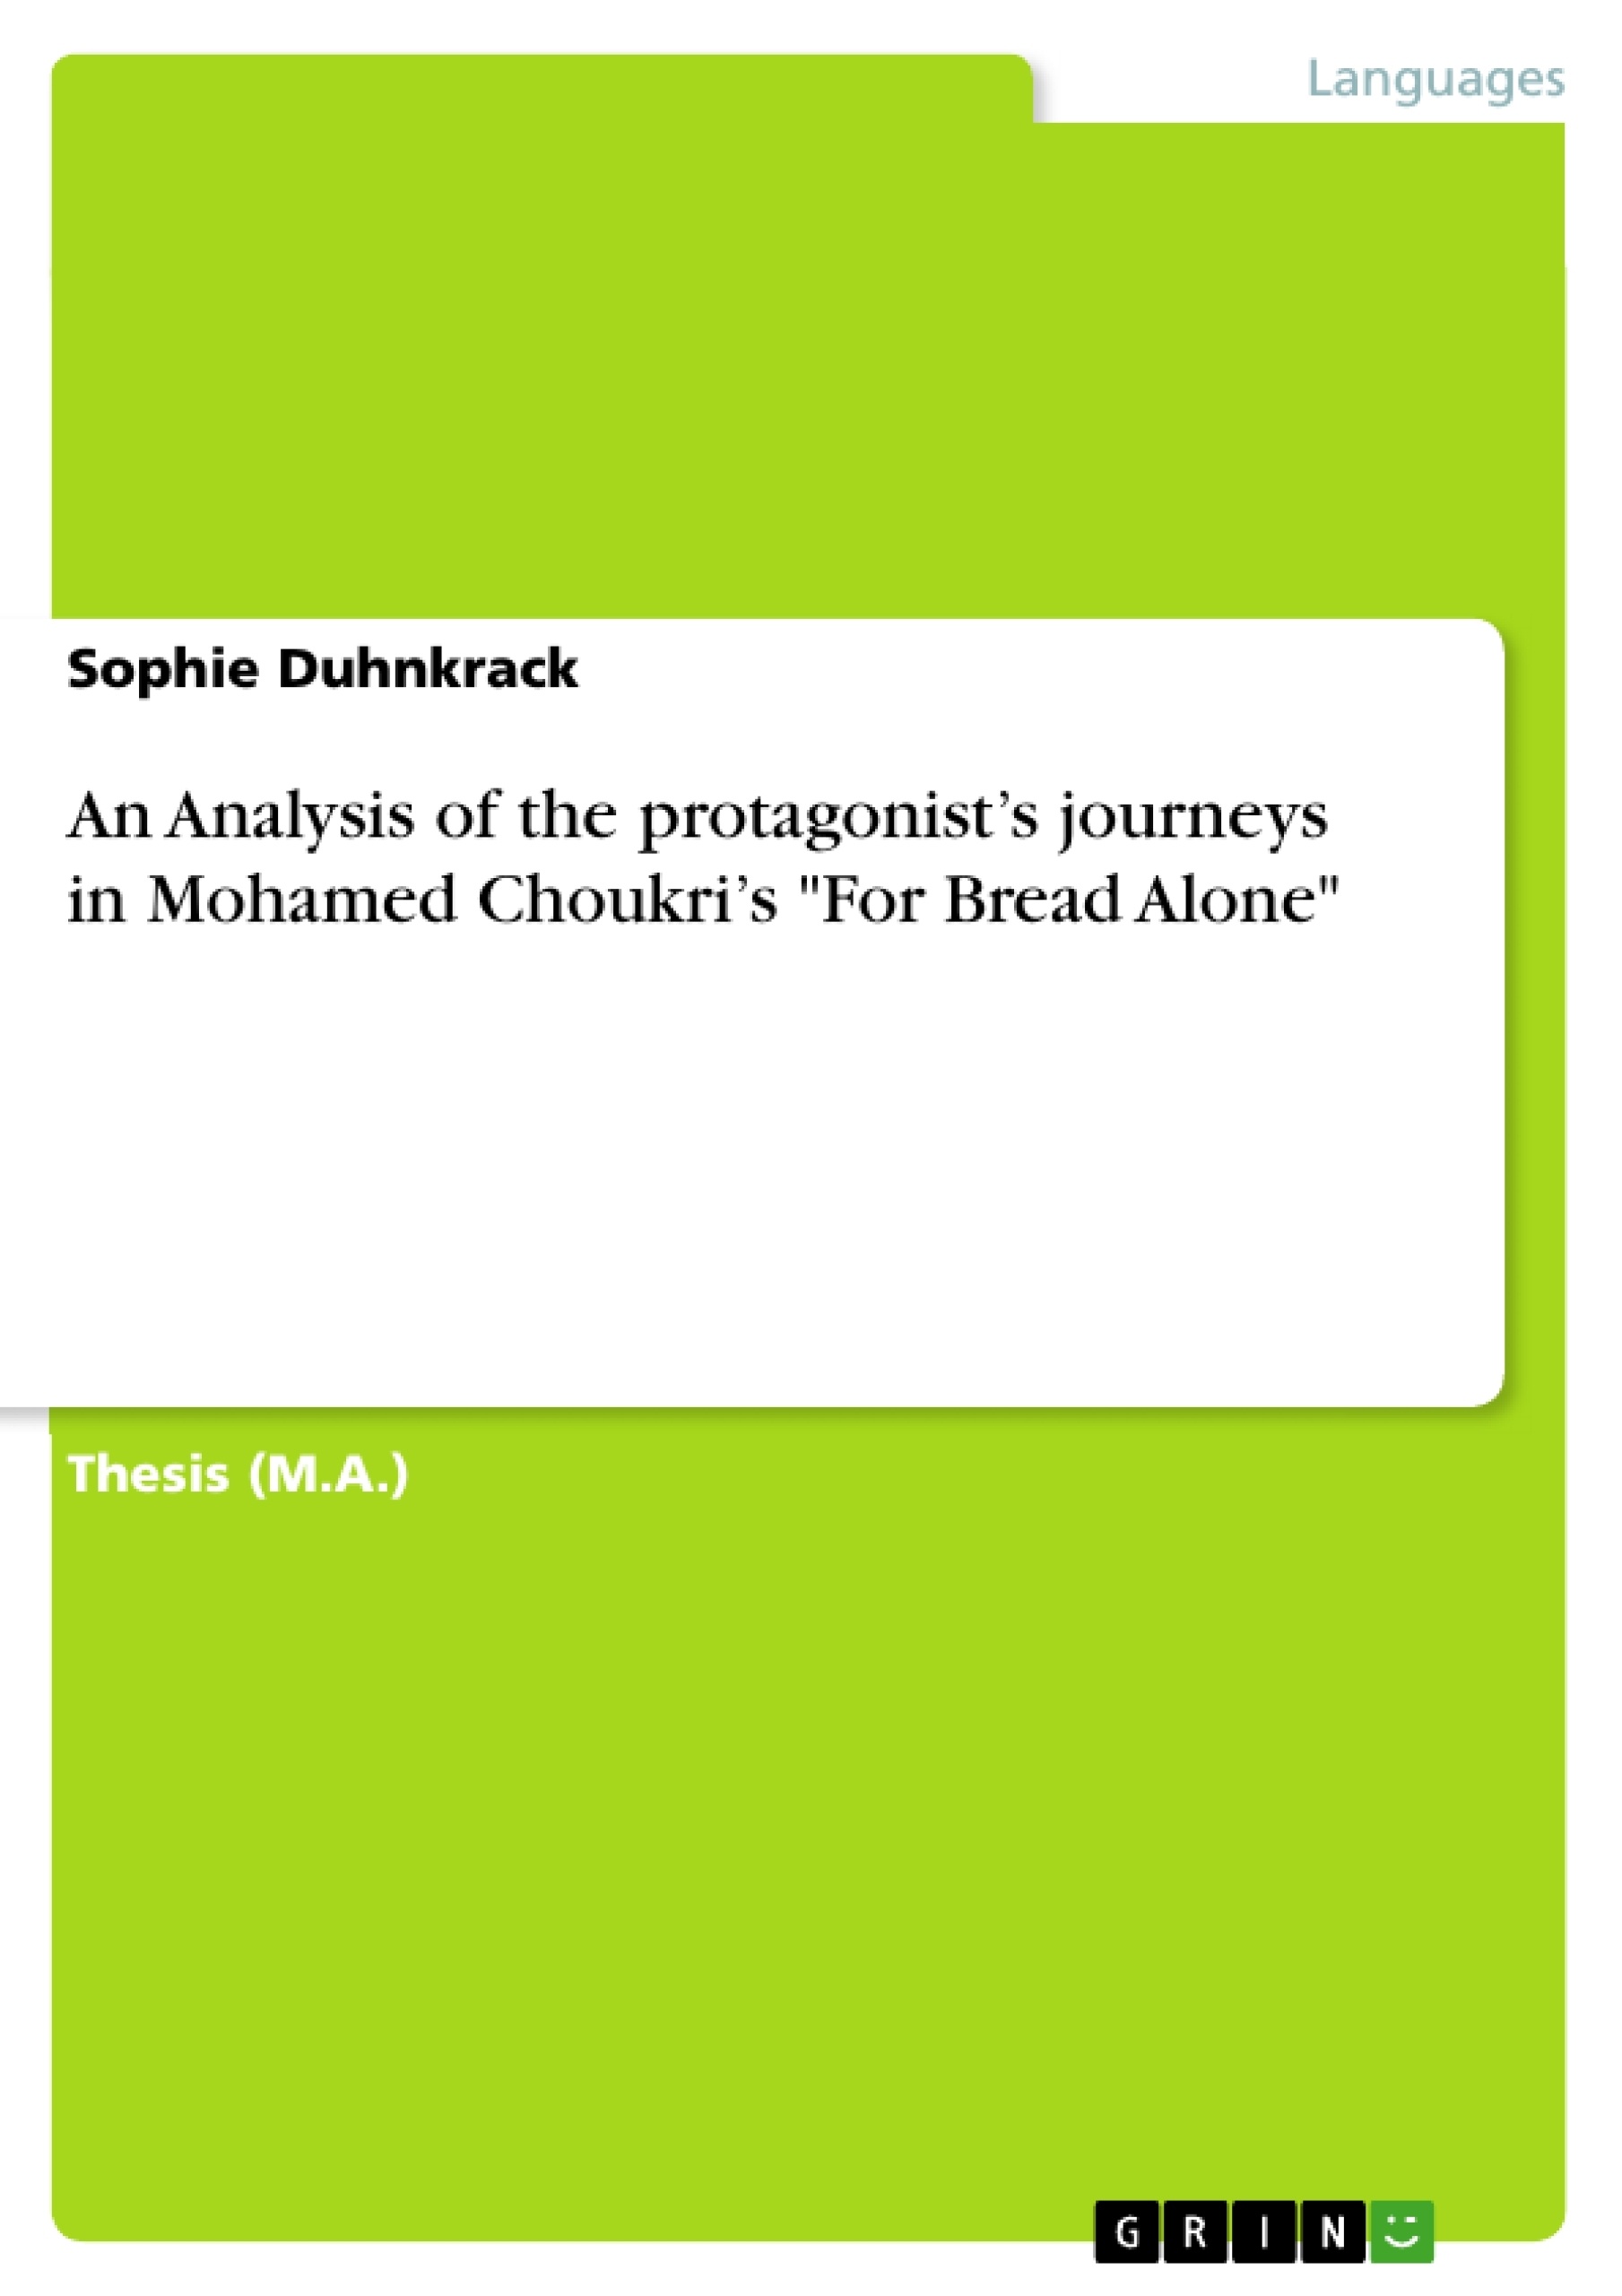 Title: An Analysis of the protagonist’s journeys in Mohamed Choukri’s "For Bread Alone"